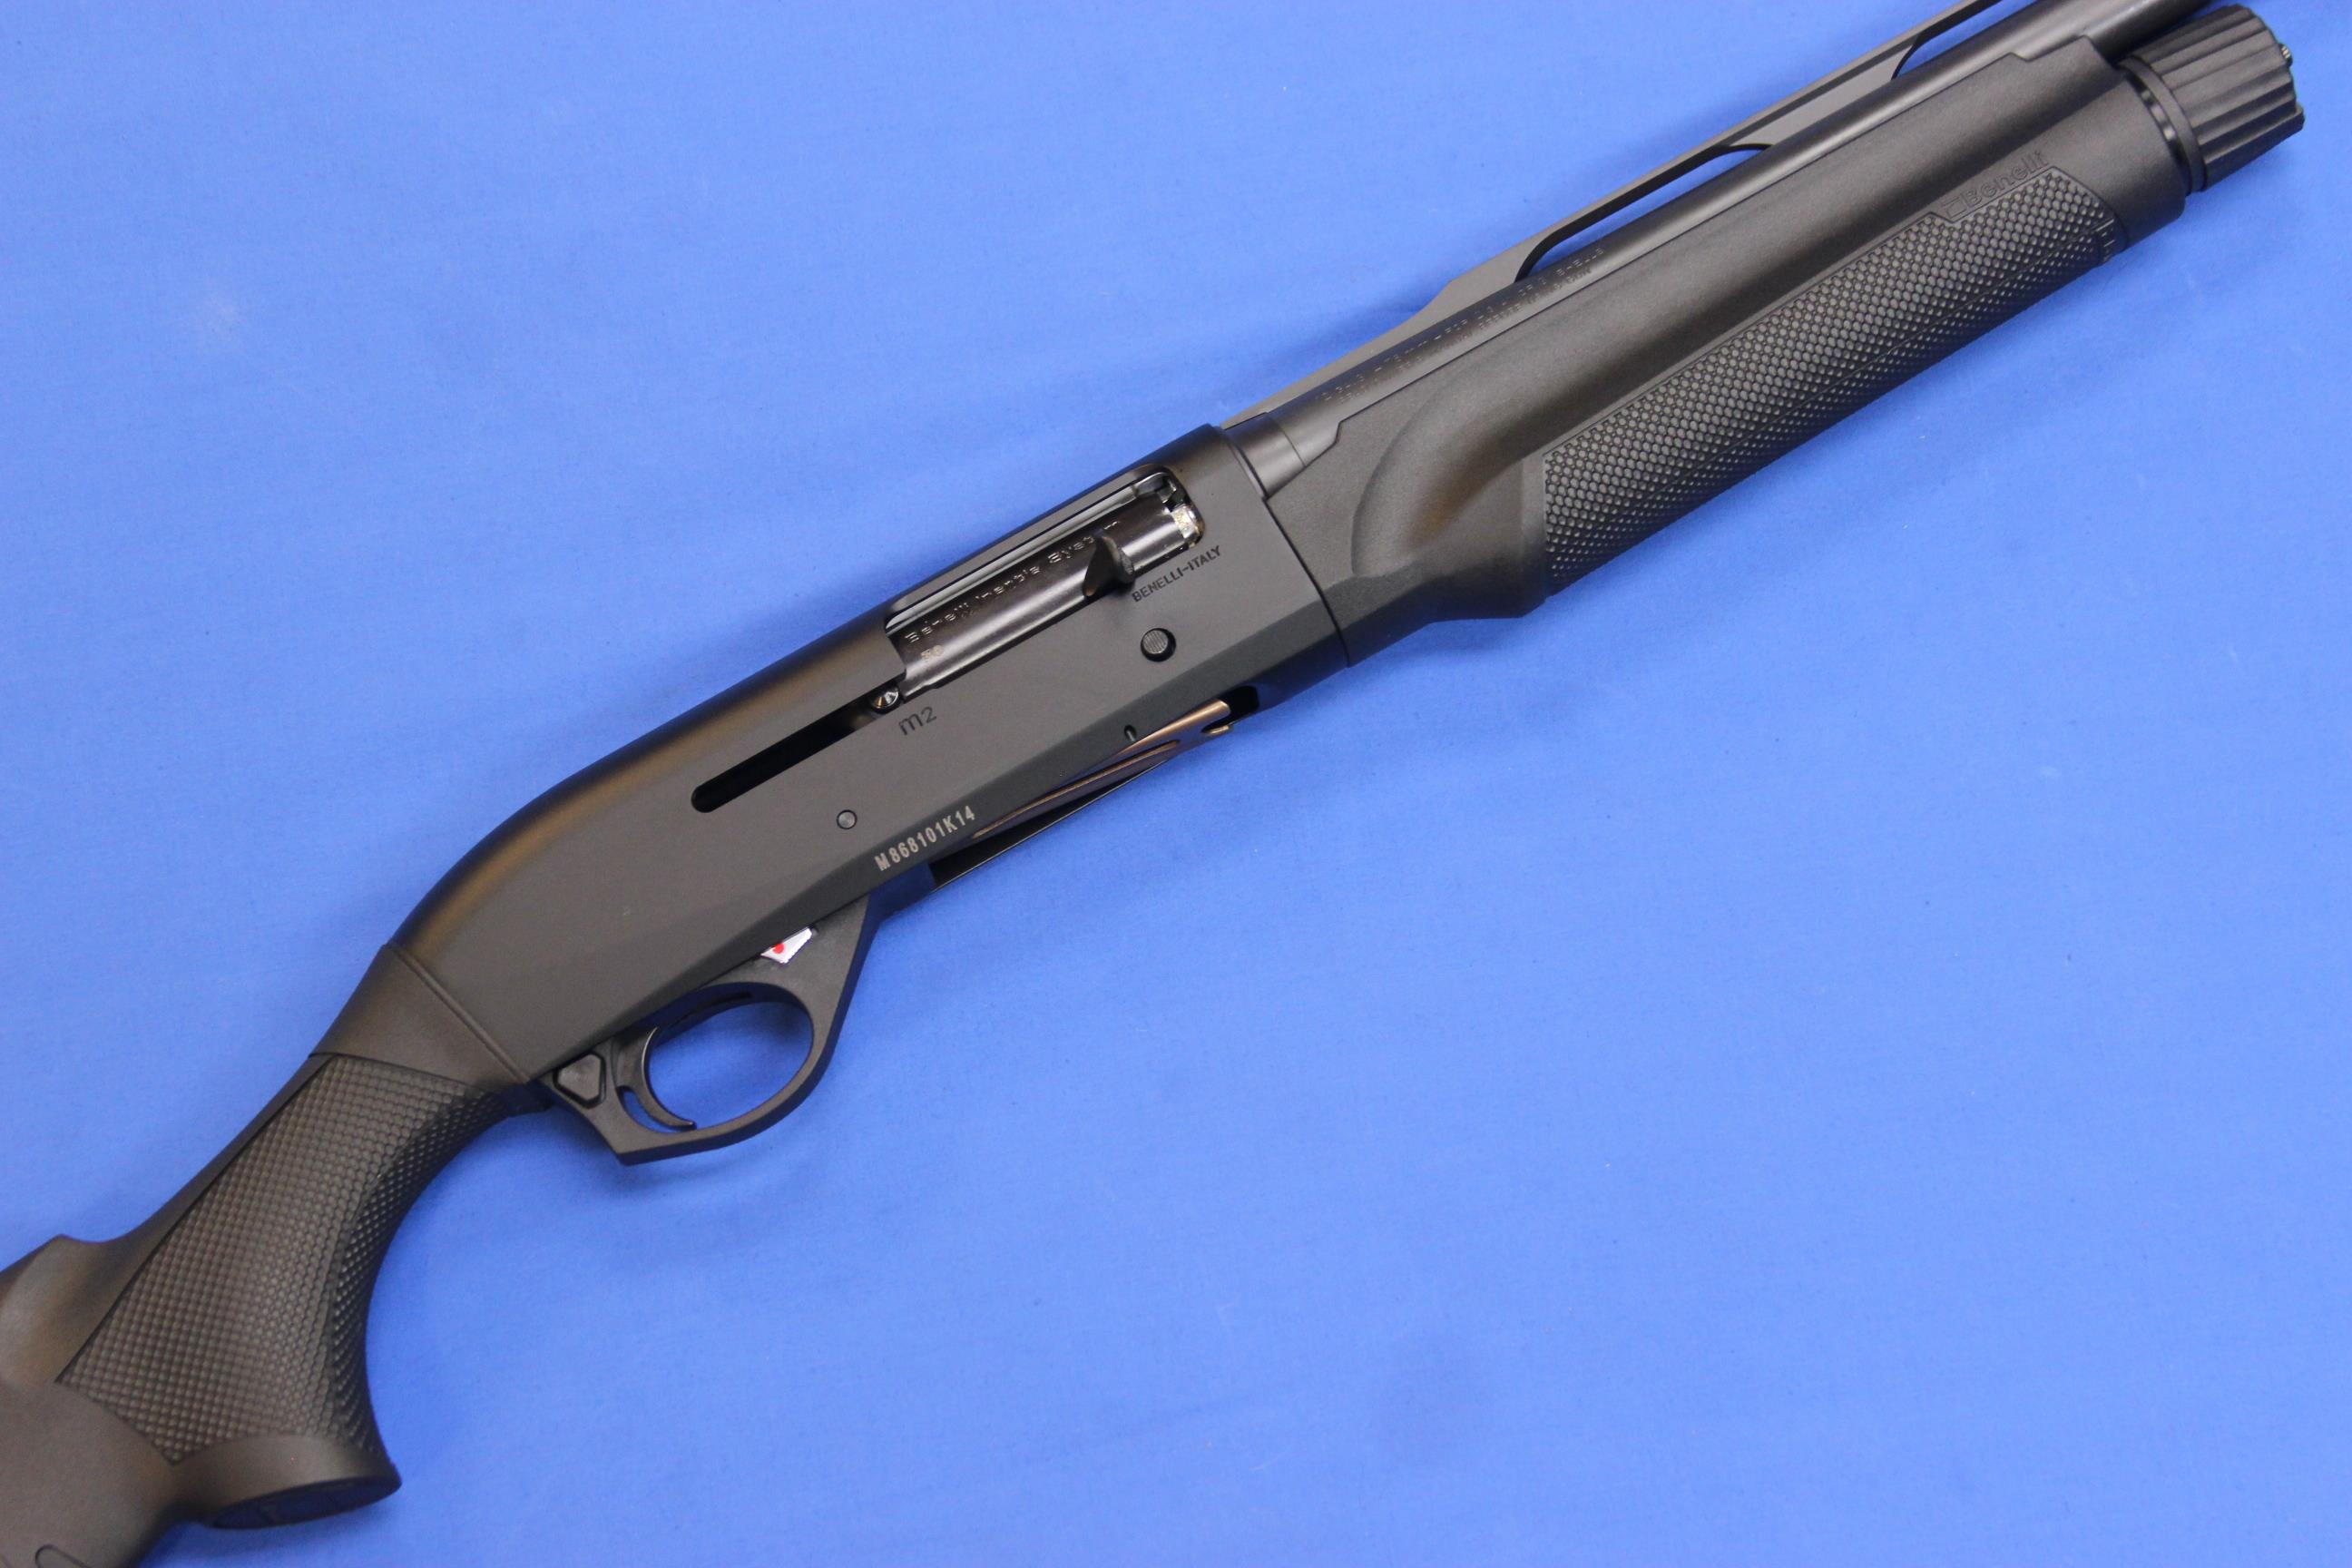 12 ga benelli m2 with comfortech stock